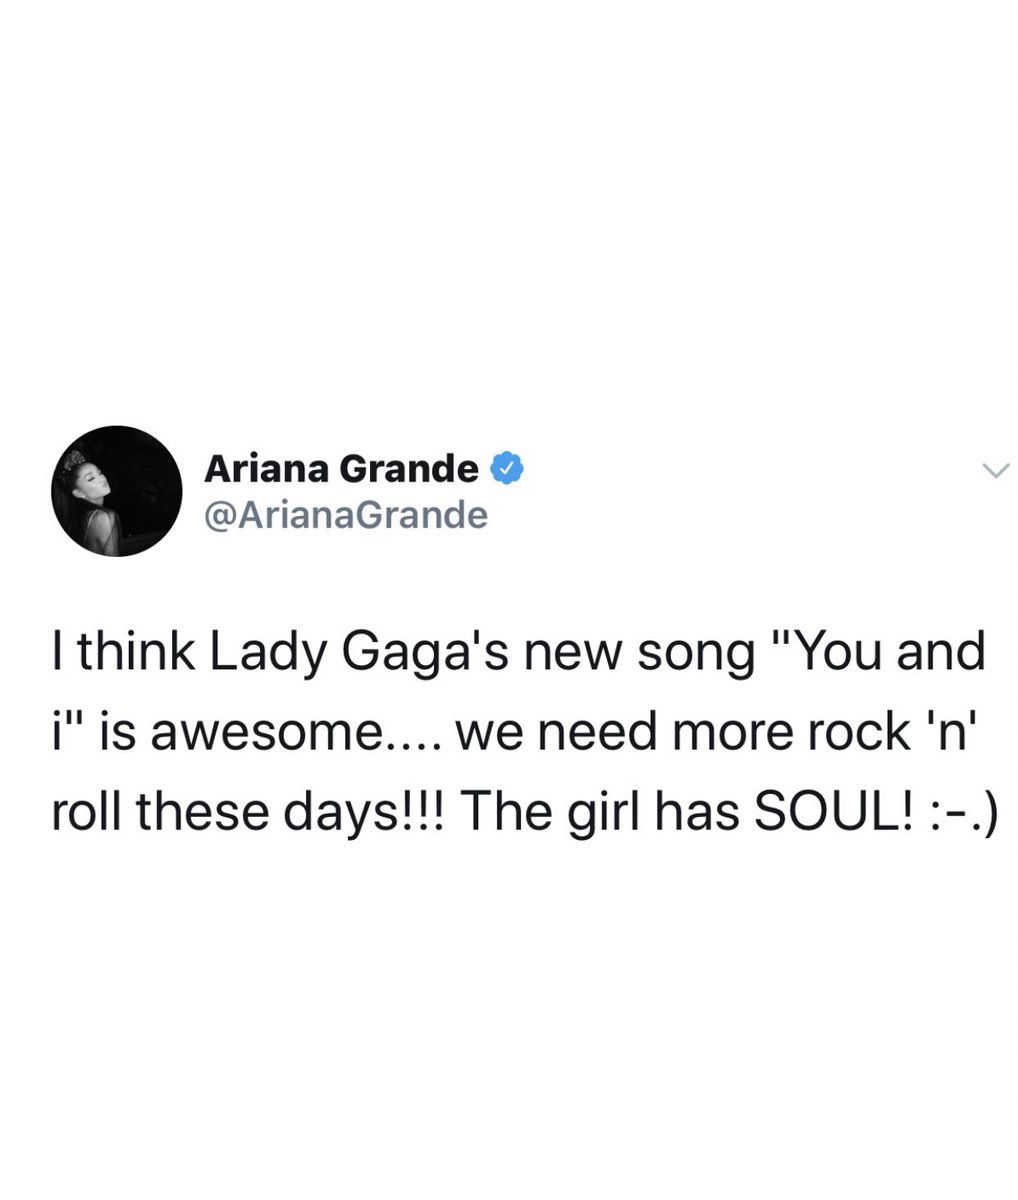 Ariana praising Gaga’s 2011 track ‘Yoü and I” over a year before it’s official release. Gaga had only sang the song a few times during her Monster Ball Tour at this point